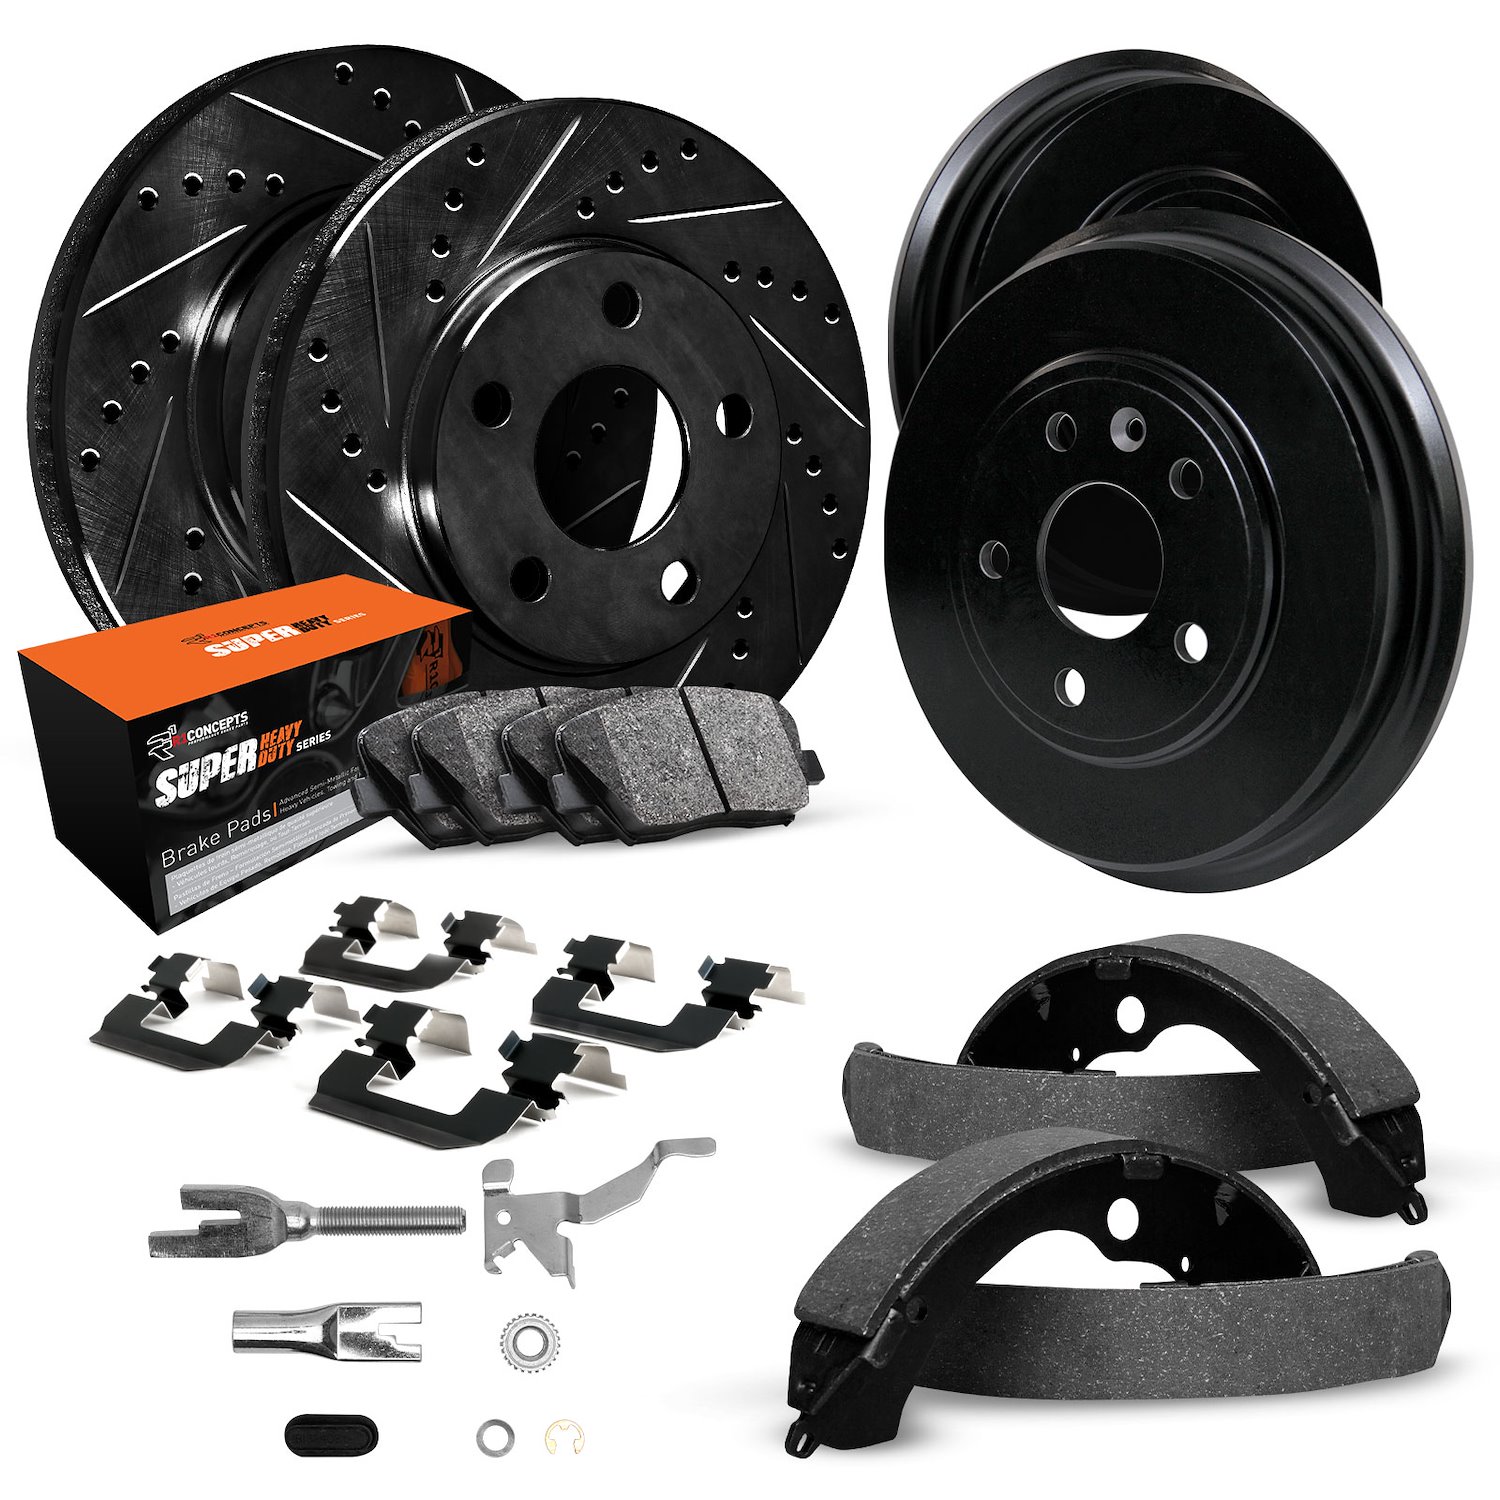 E-Line Slotted Black Brake Rotor & Drum Set w/Super-Duty Pads, Shoes, Hardware/Adjusters, 1983-1991 Ford/Lincoln/Mercury/Mazda